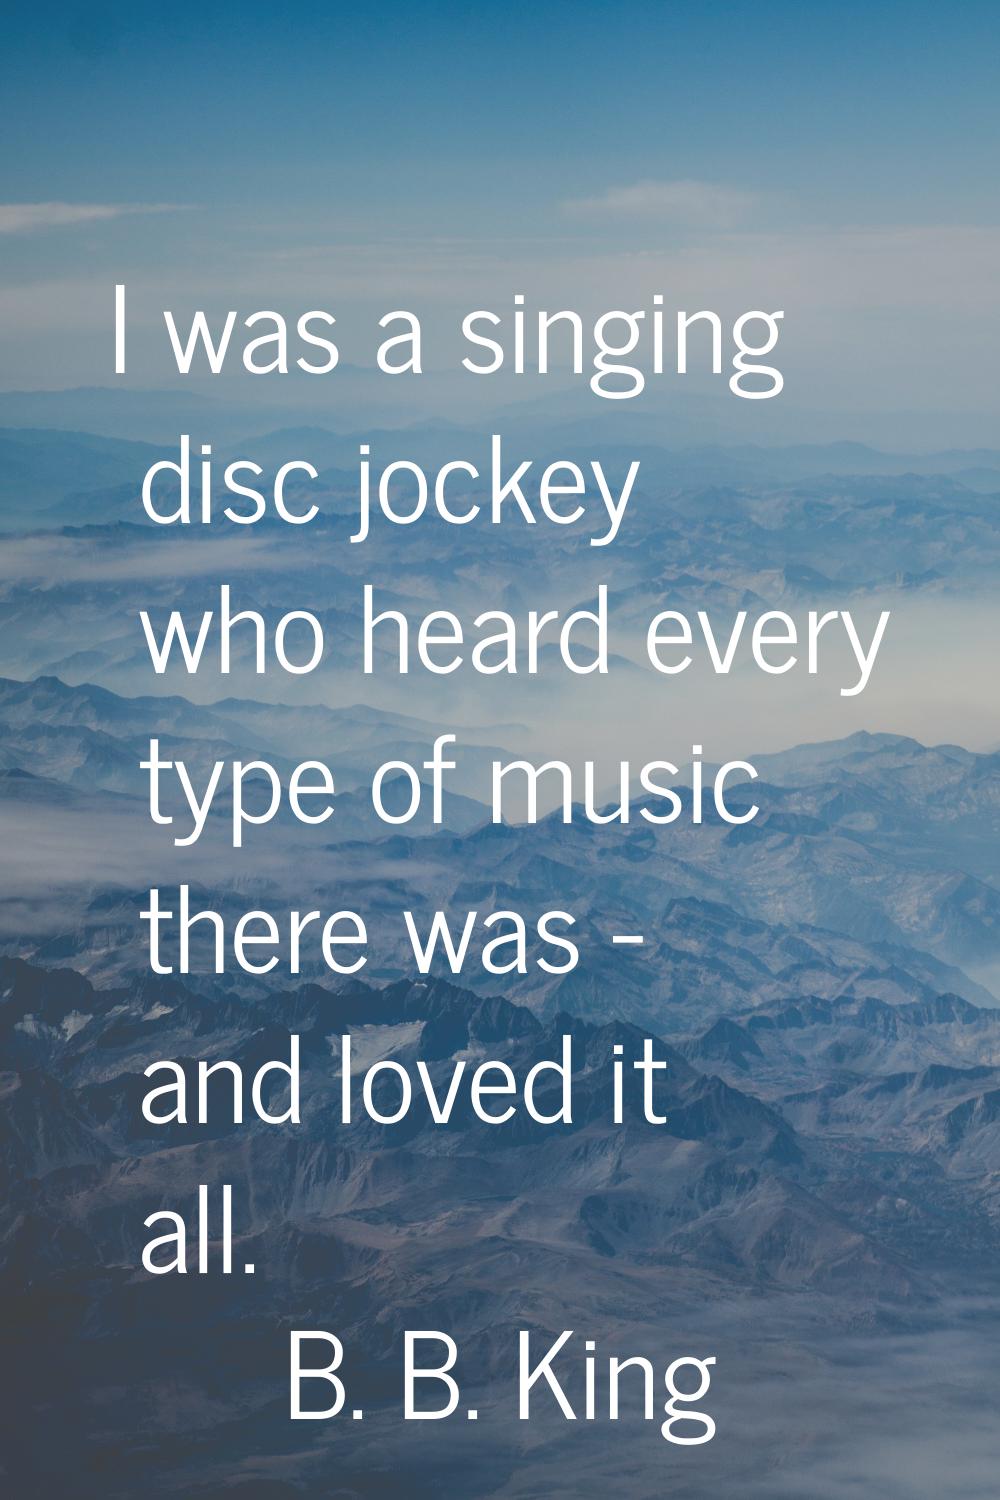 I was a singing disc jockey who heard every type of music there was - and loved it all.